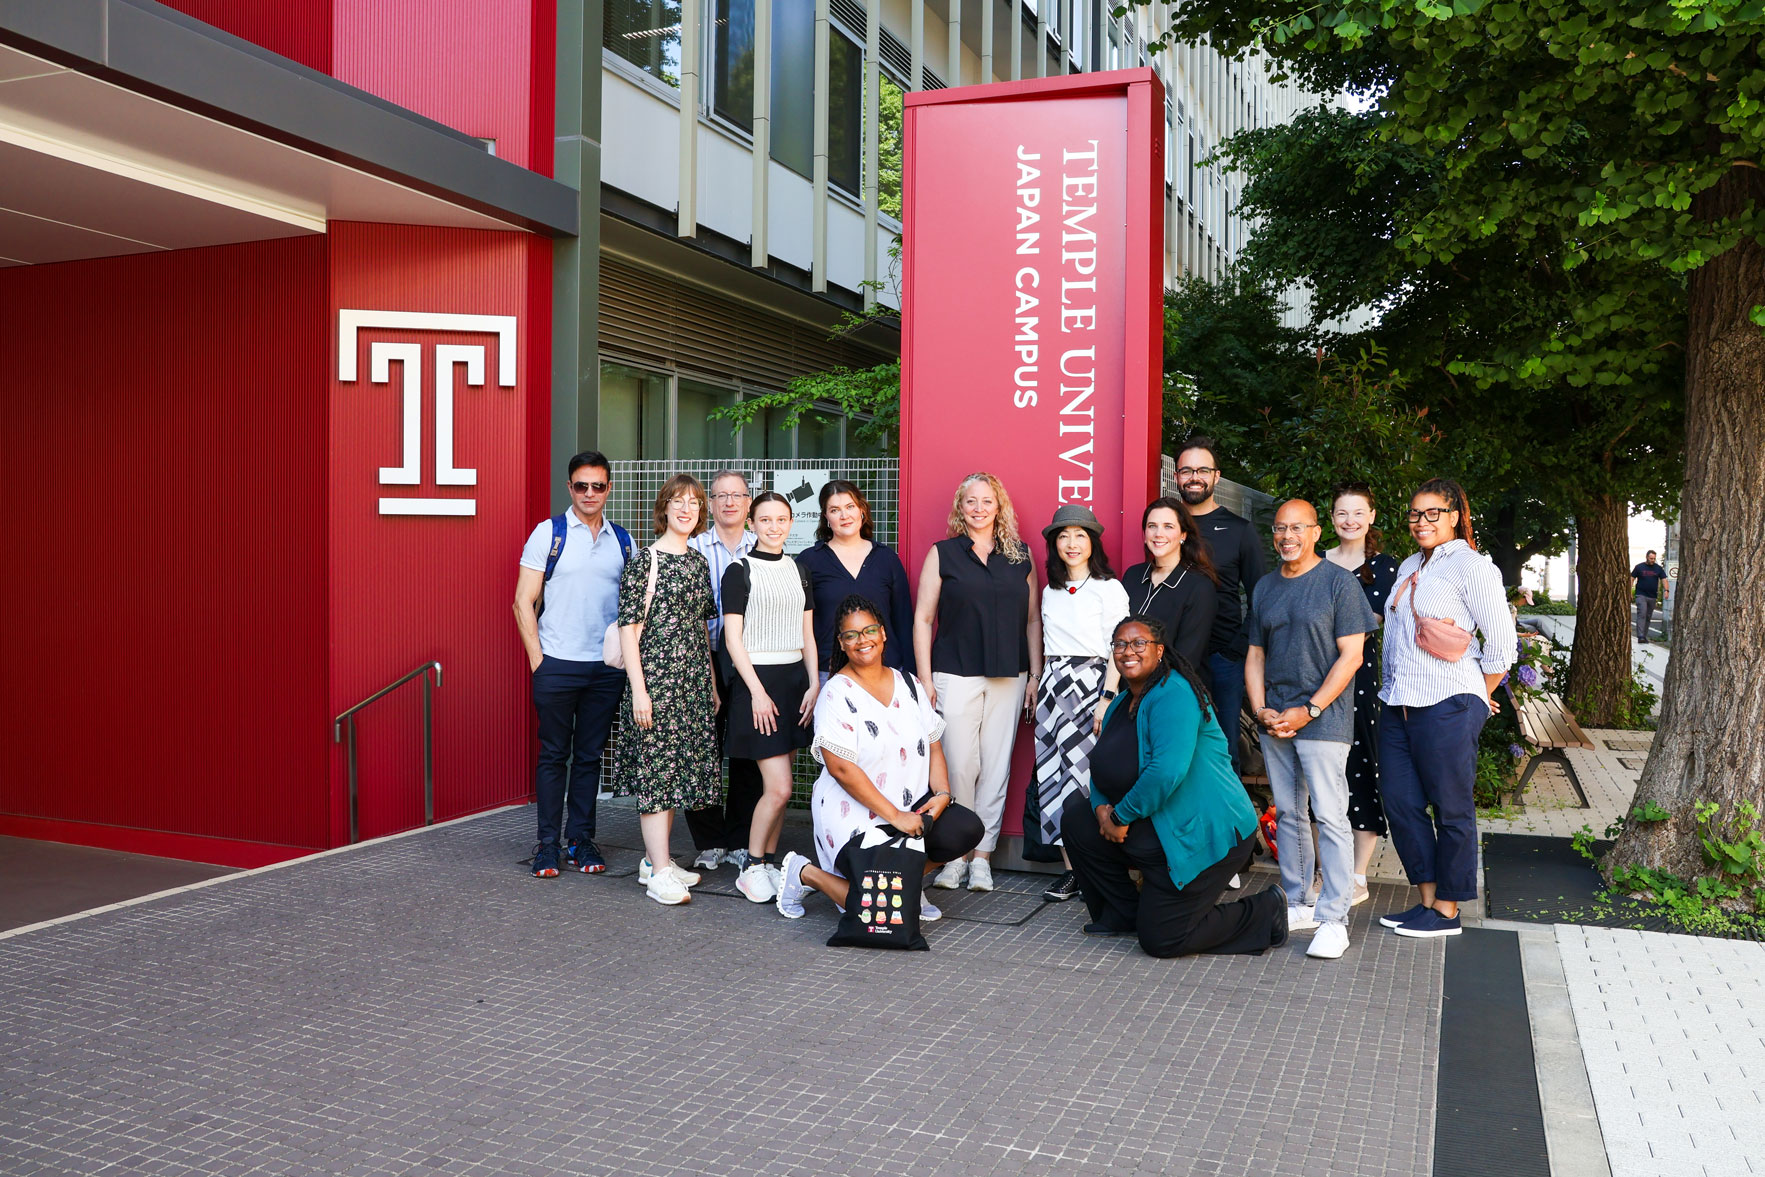 Representatives of four partner universities and 10 counselors from Temple’s Main Campus pose for a group photo in front of TUJ’s main entrance.